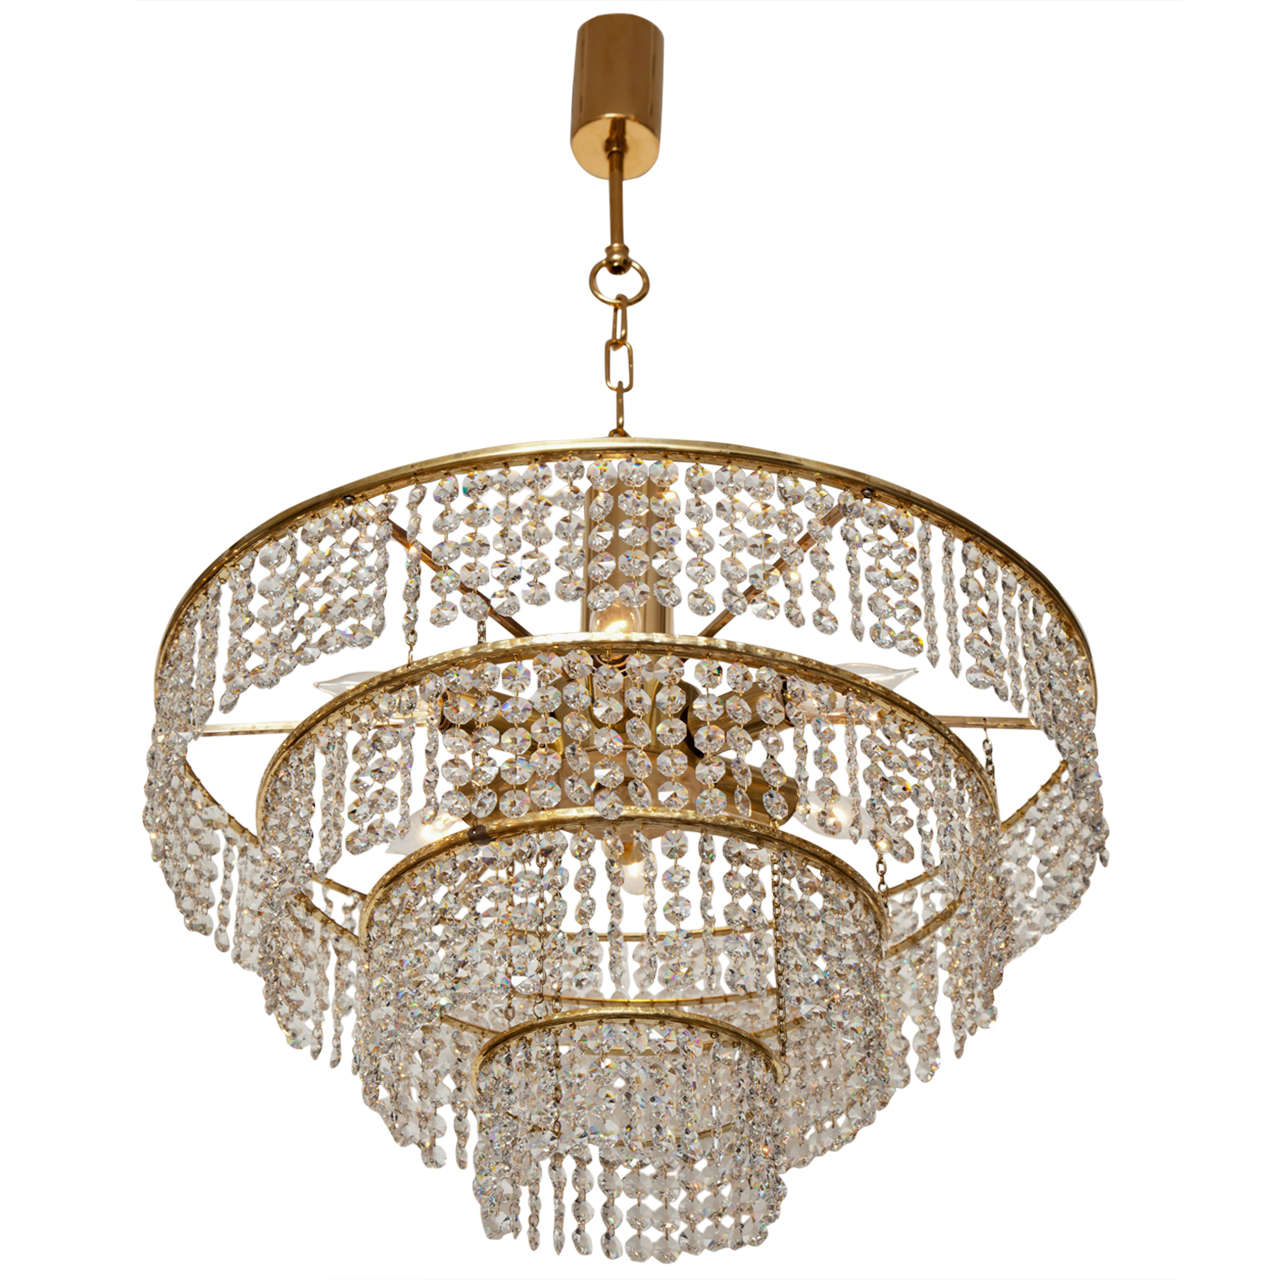 Four-Tier German Crystal Chandelier For Sale